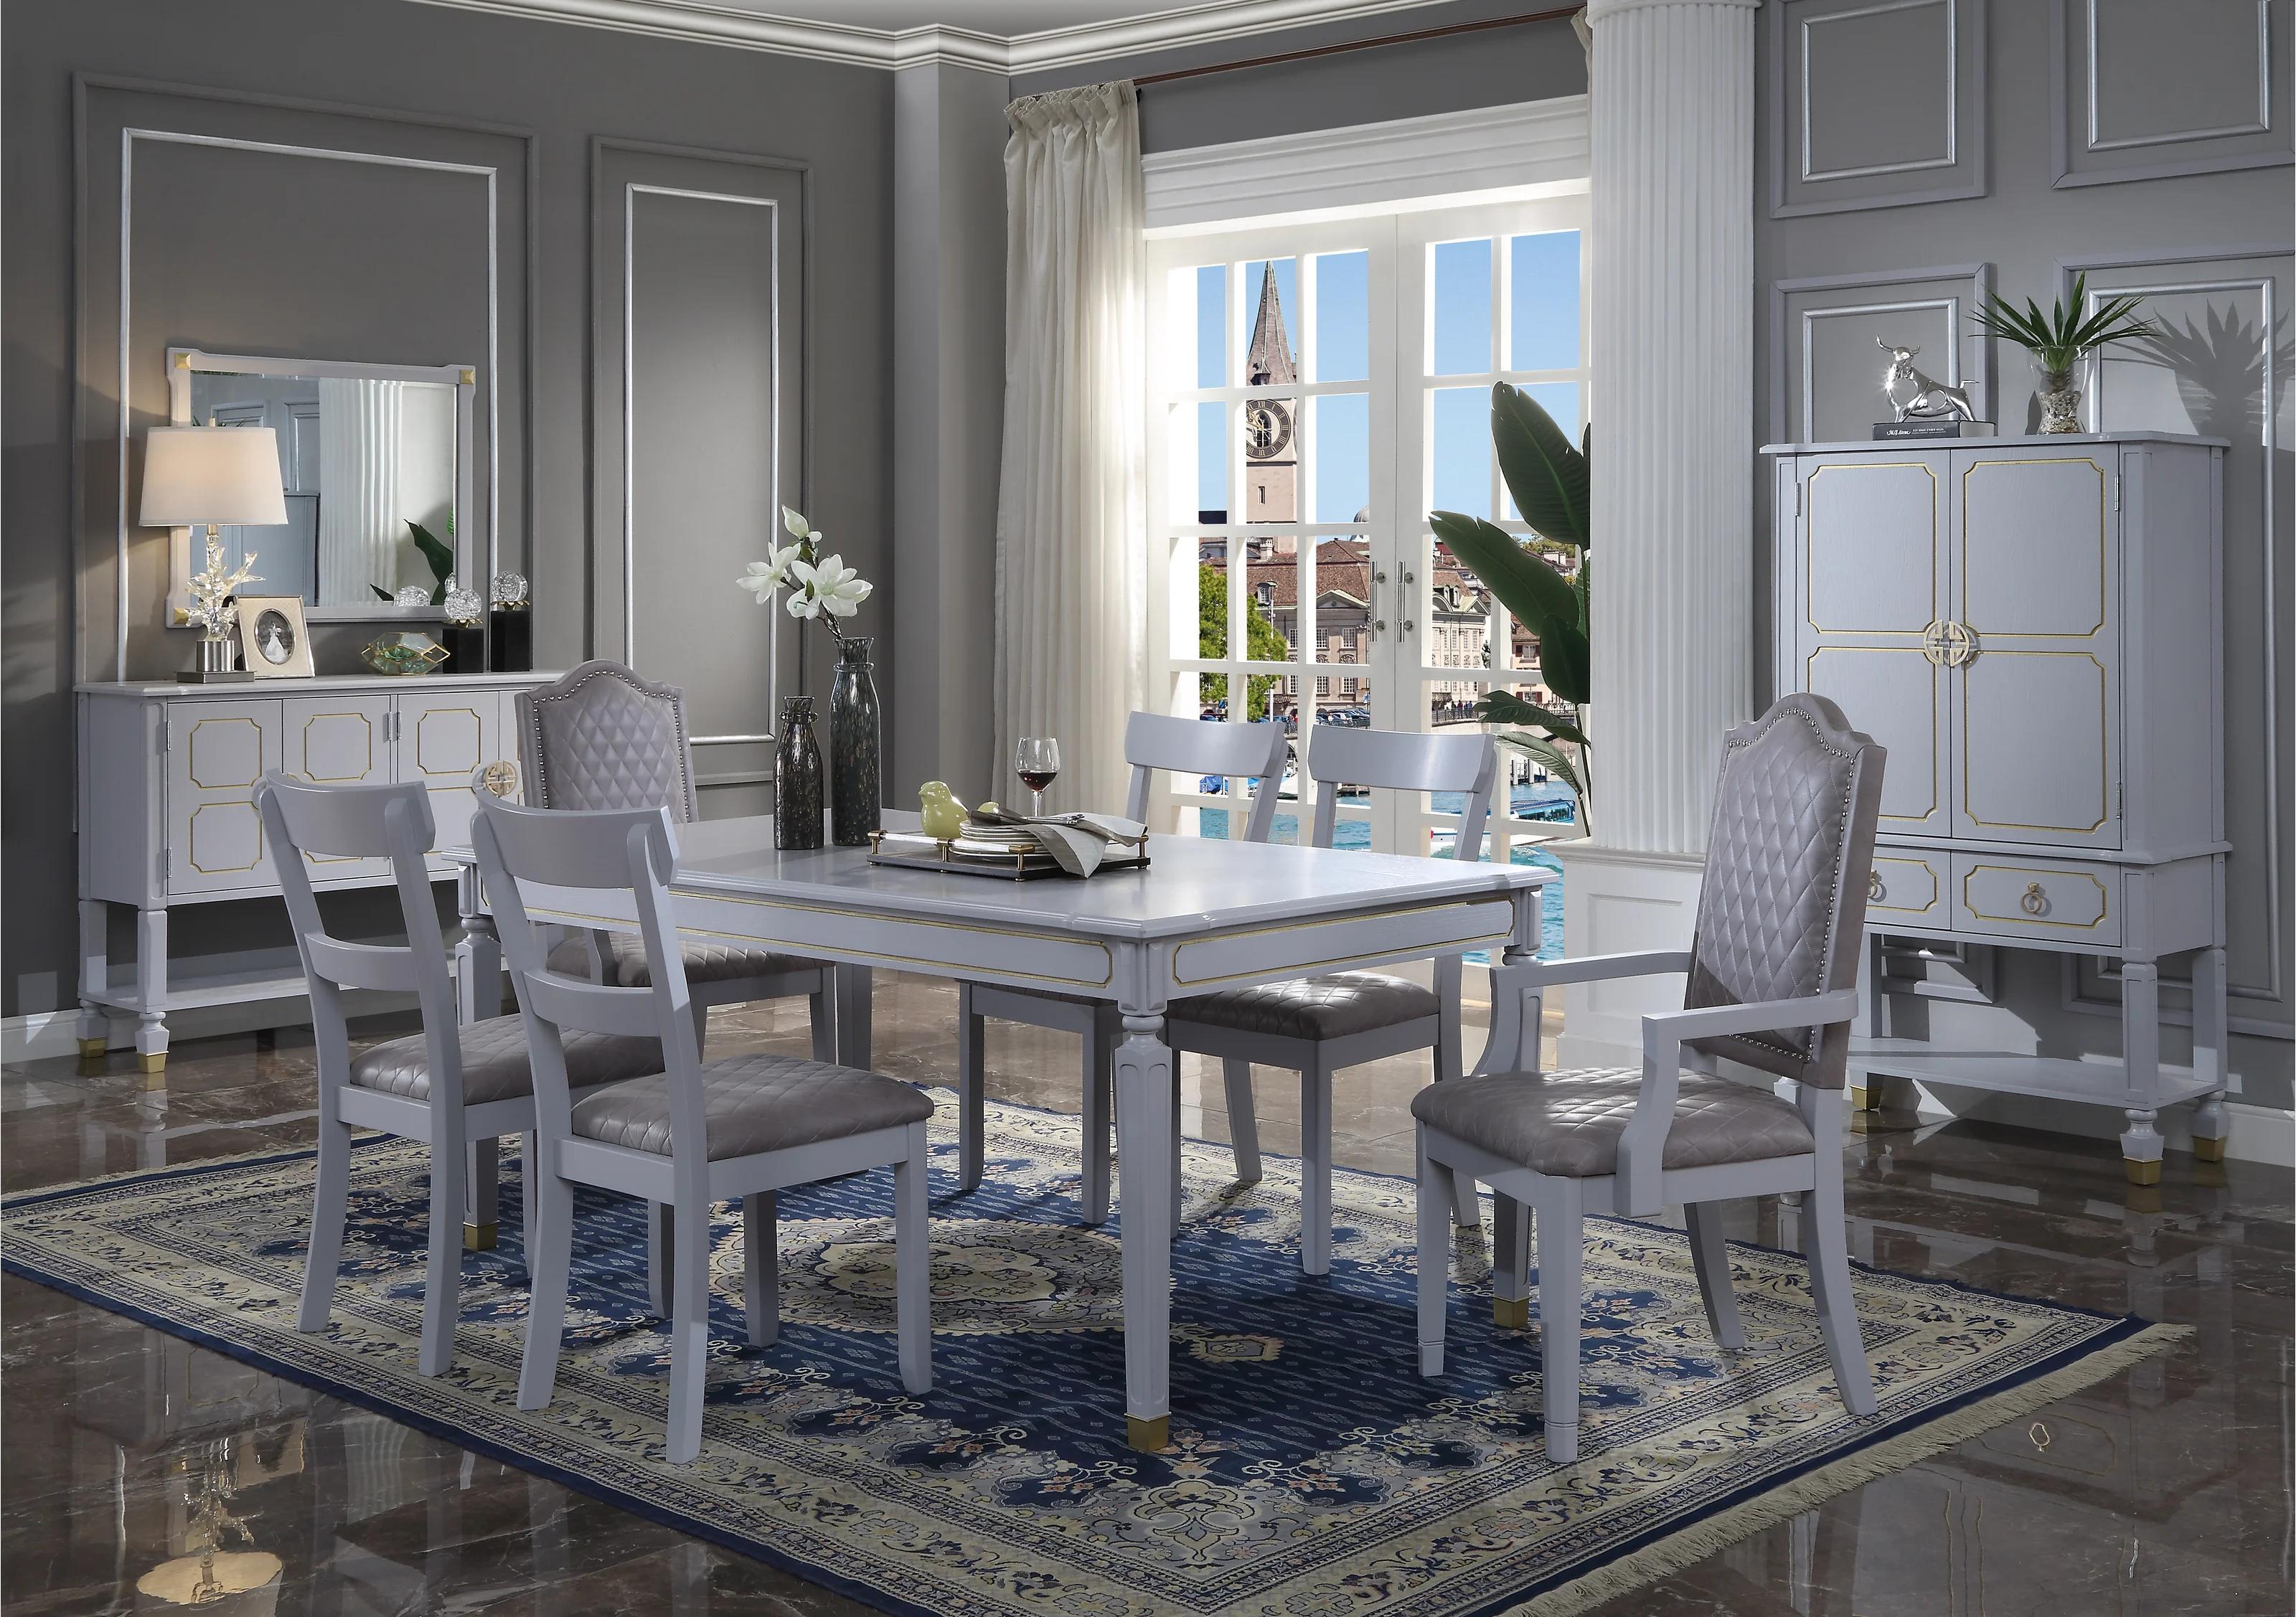 Classic Dining Room Set House Marchese 68860-10pcs in Gray Fabric